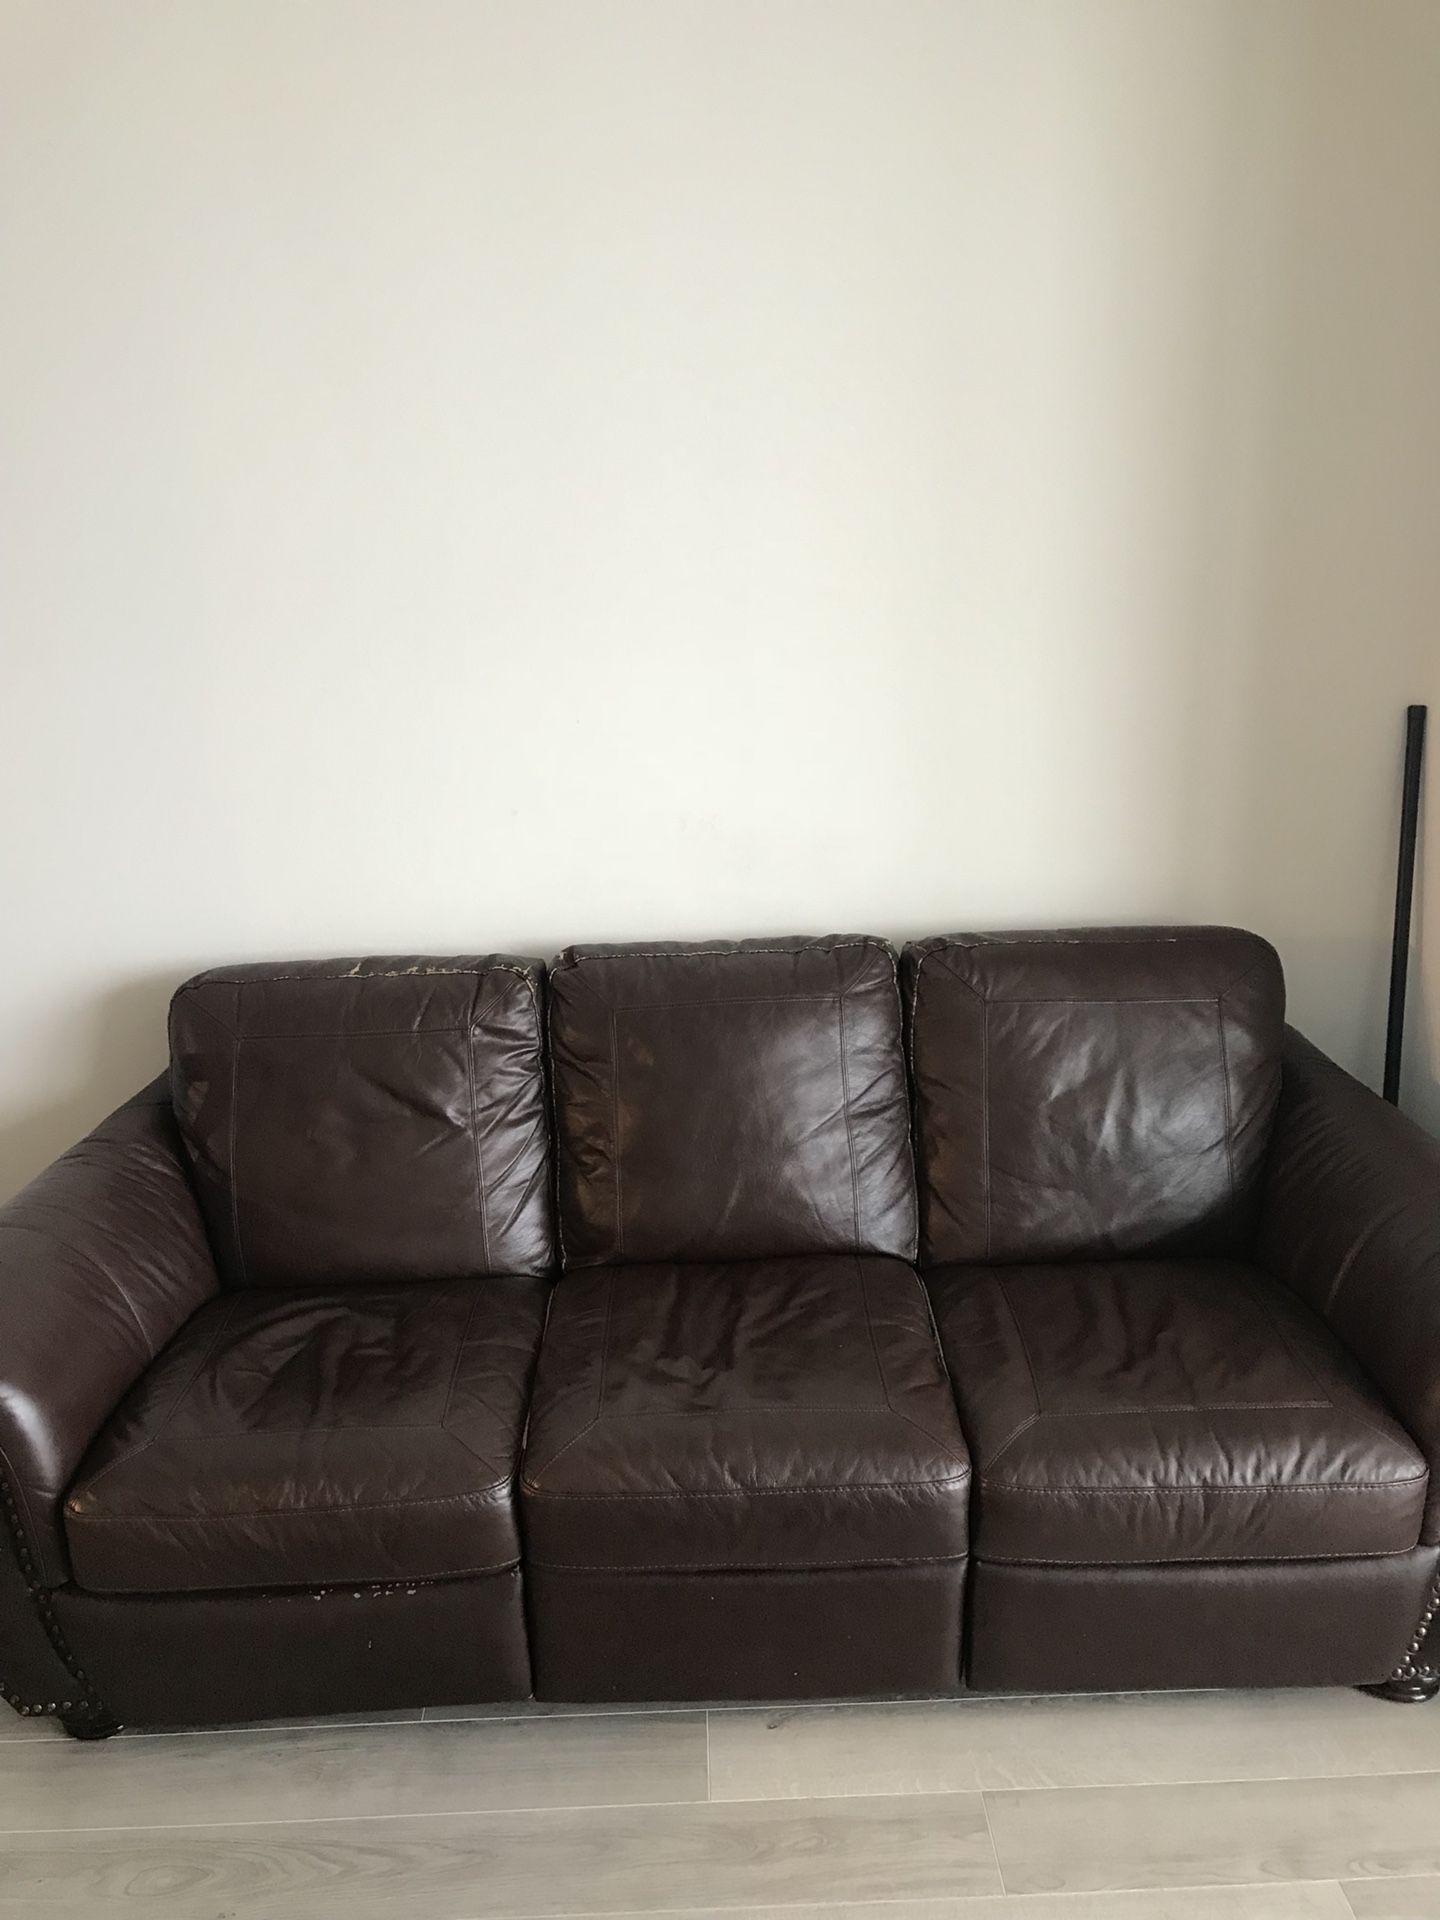 Leather couch. $125 OBO